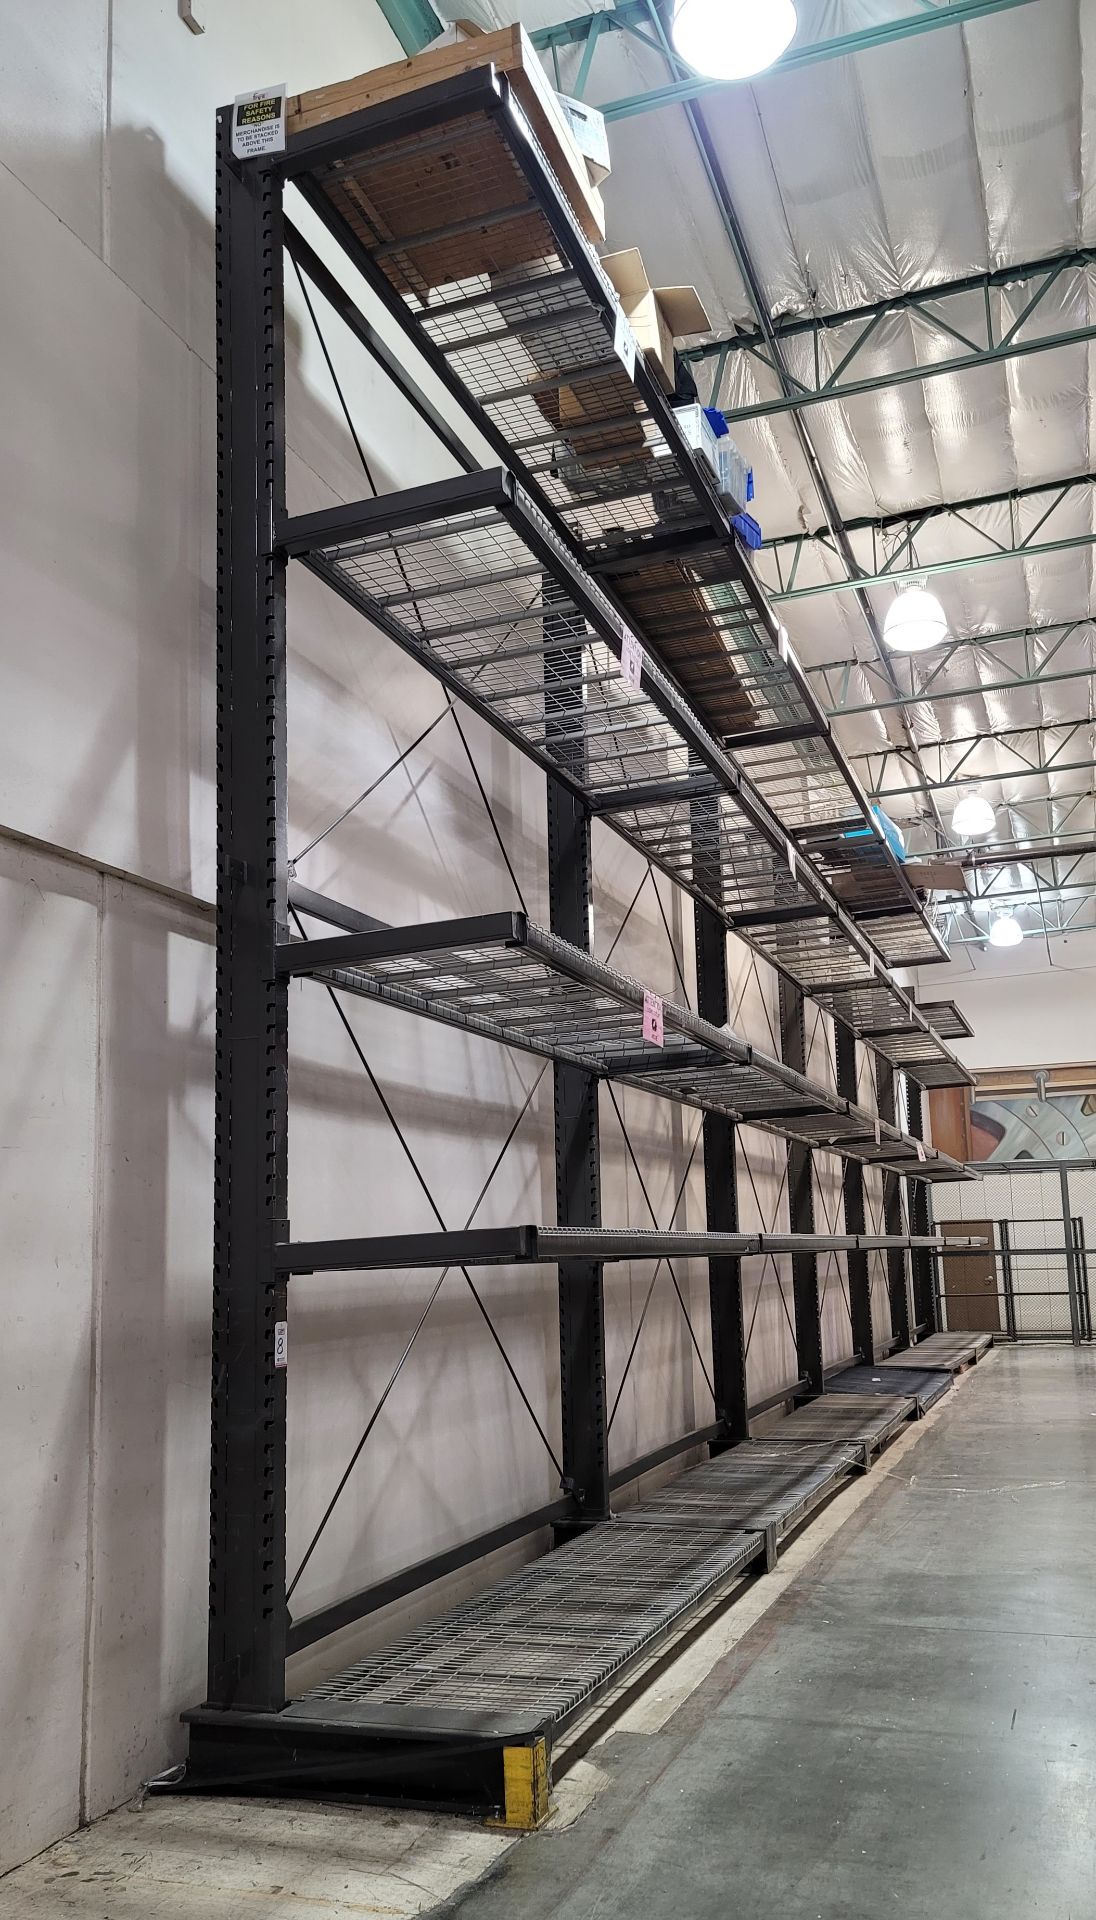 LOT - (6) 12' SECTIONS OF CANTILEVER PALLET RACK, 1-SIDED, 20' HT, WIRE DECKING